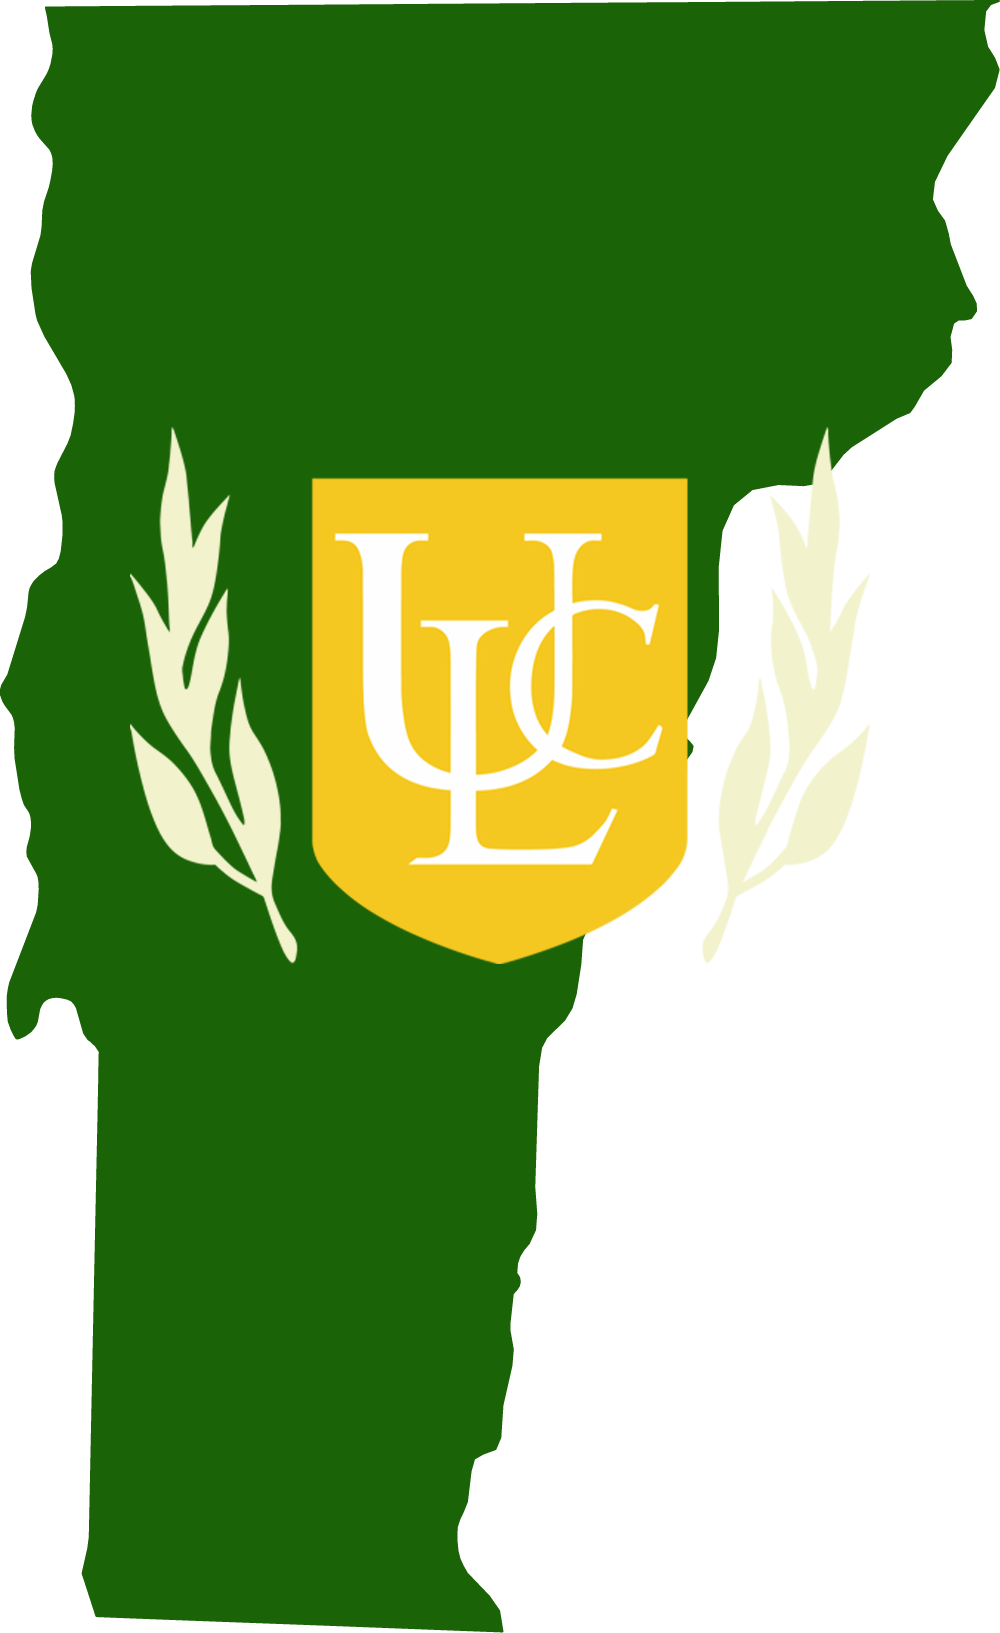 An outline of VT with the ULC logo